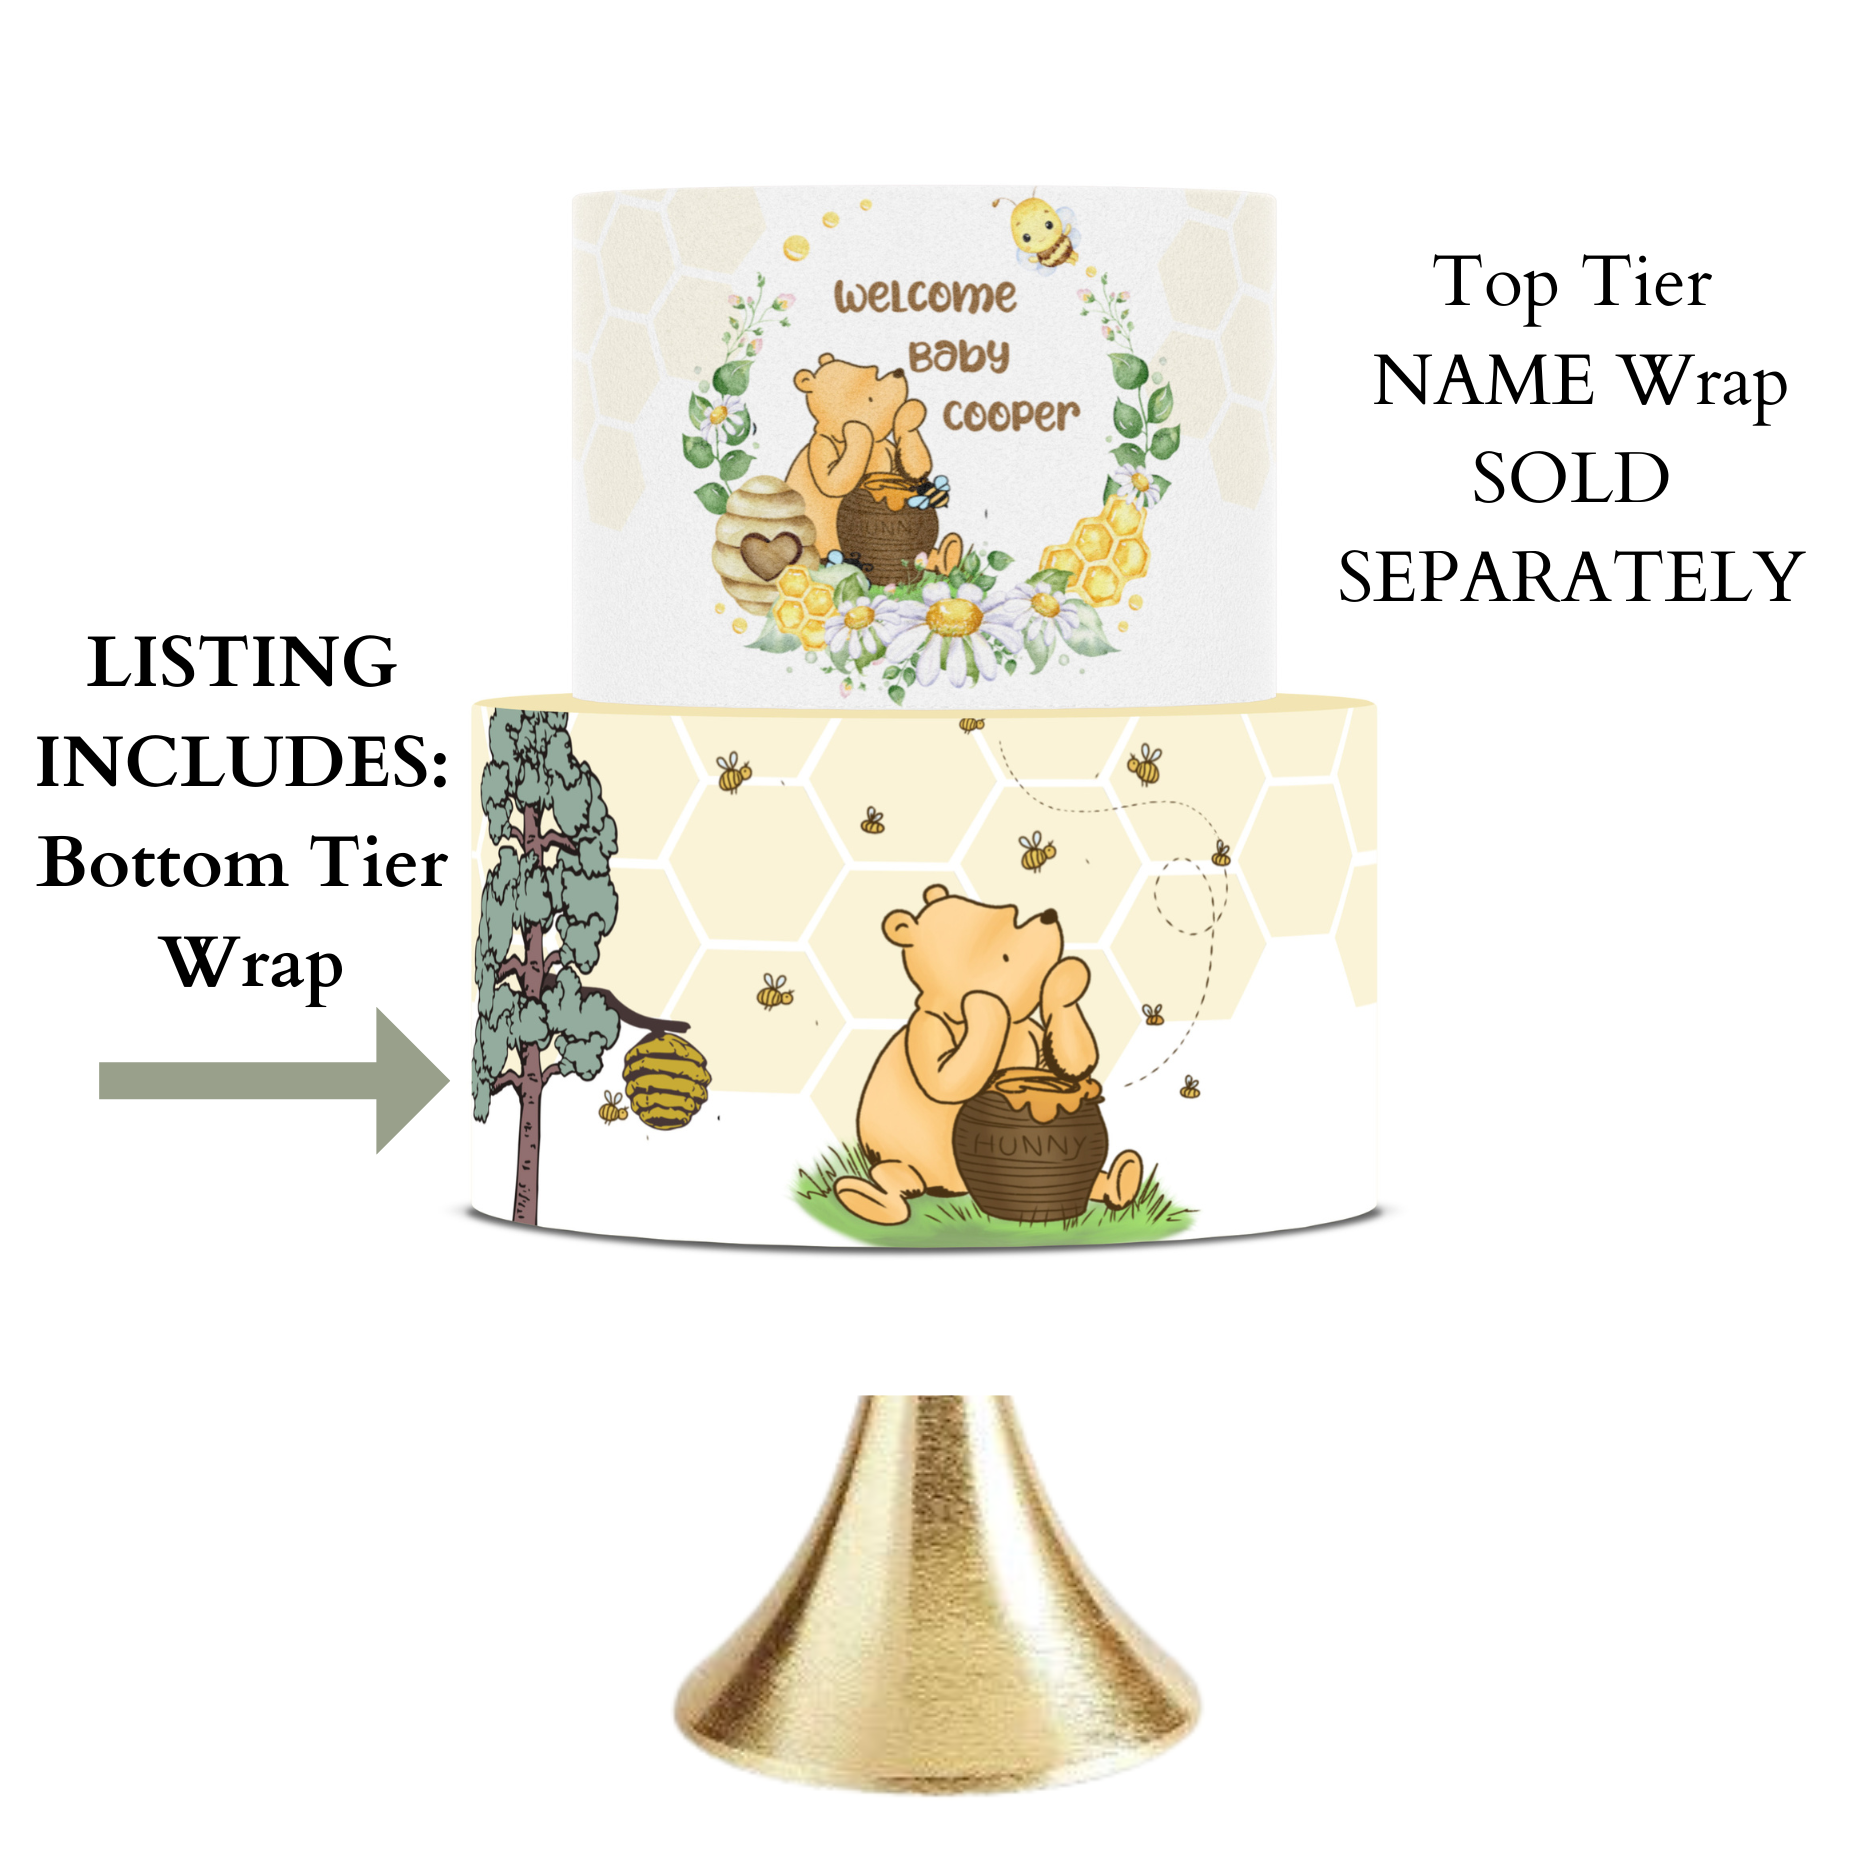 POOH BEAR BABY SHOWER EDIBLE IMAGE CAKE DECORATIONS